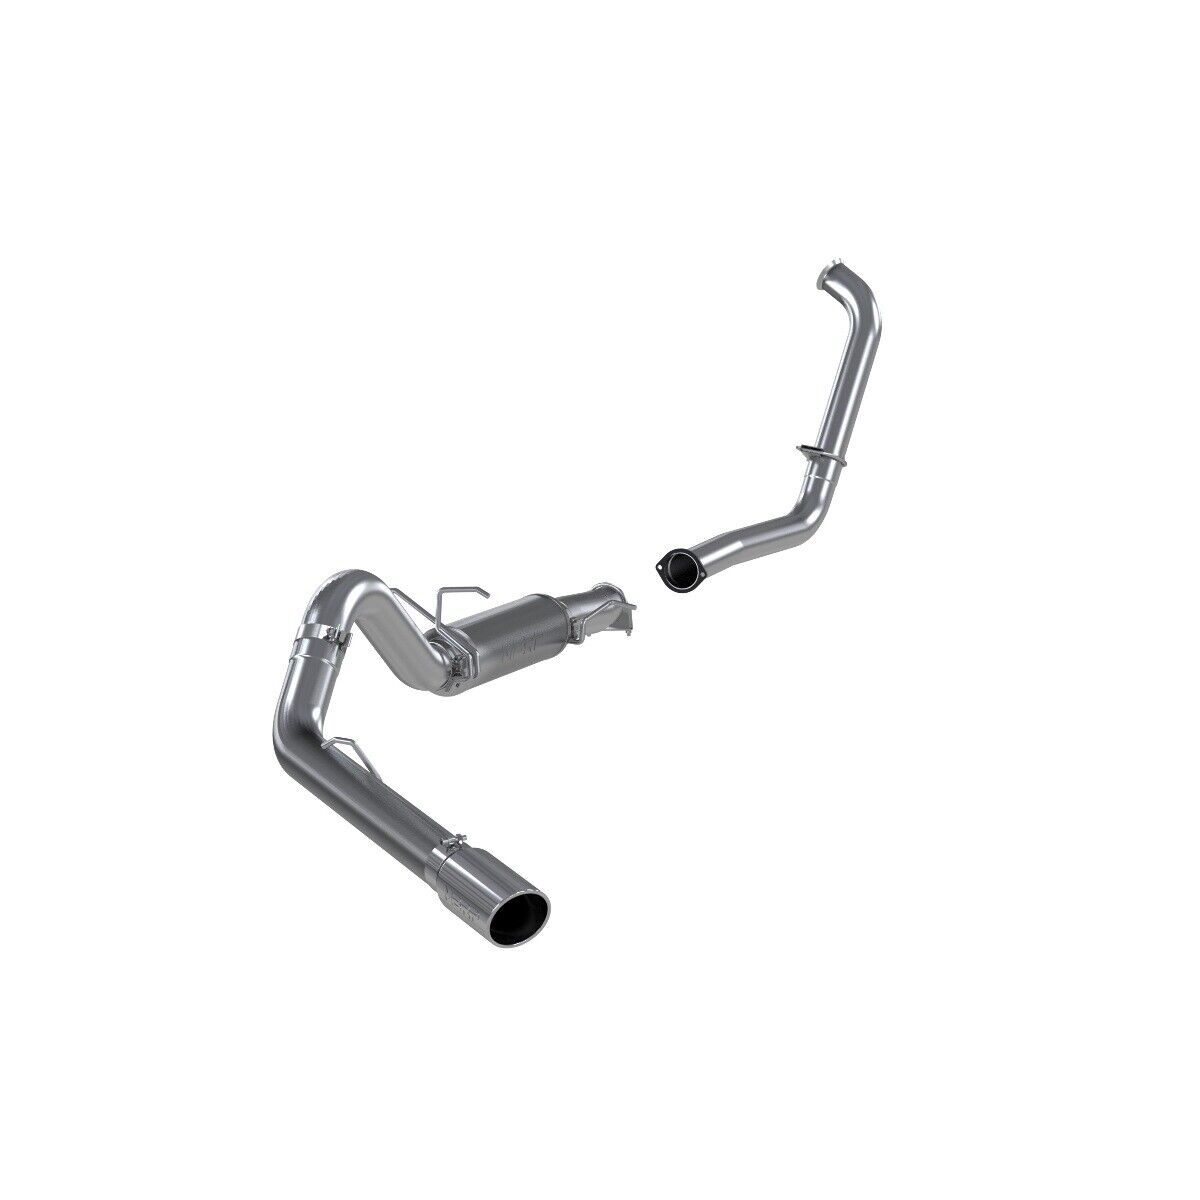 MBRP Installer Series Exhaust For 03-05 Ford Excursion 6.0L Diesel S6216AL